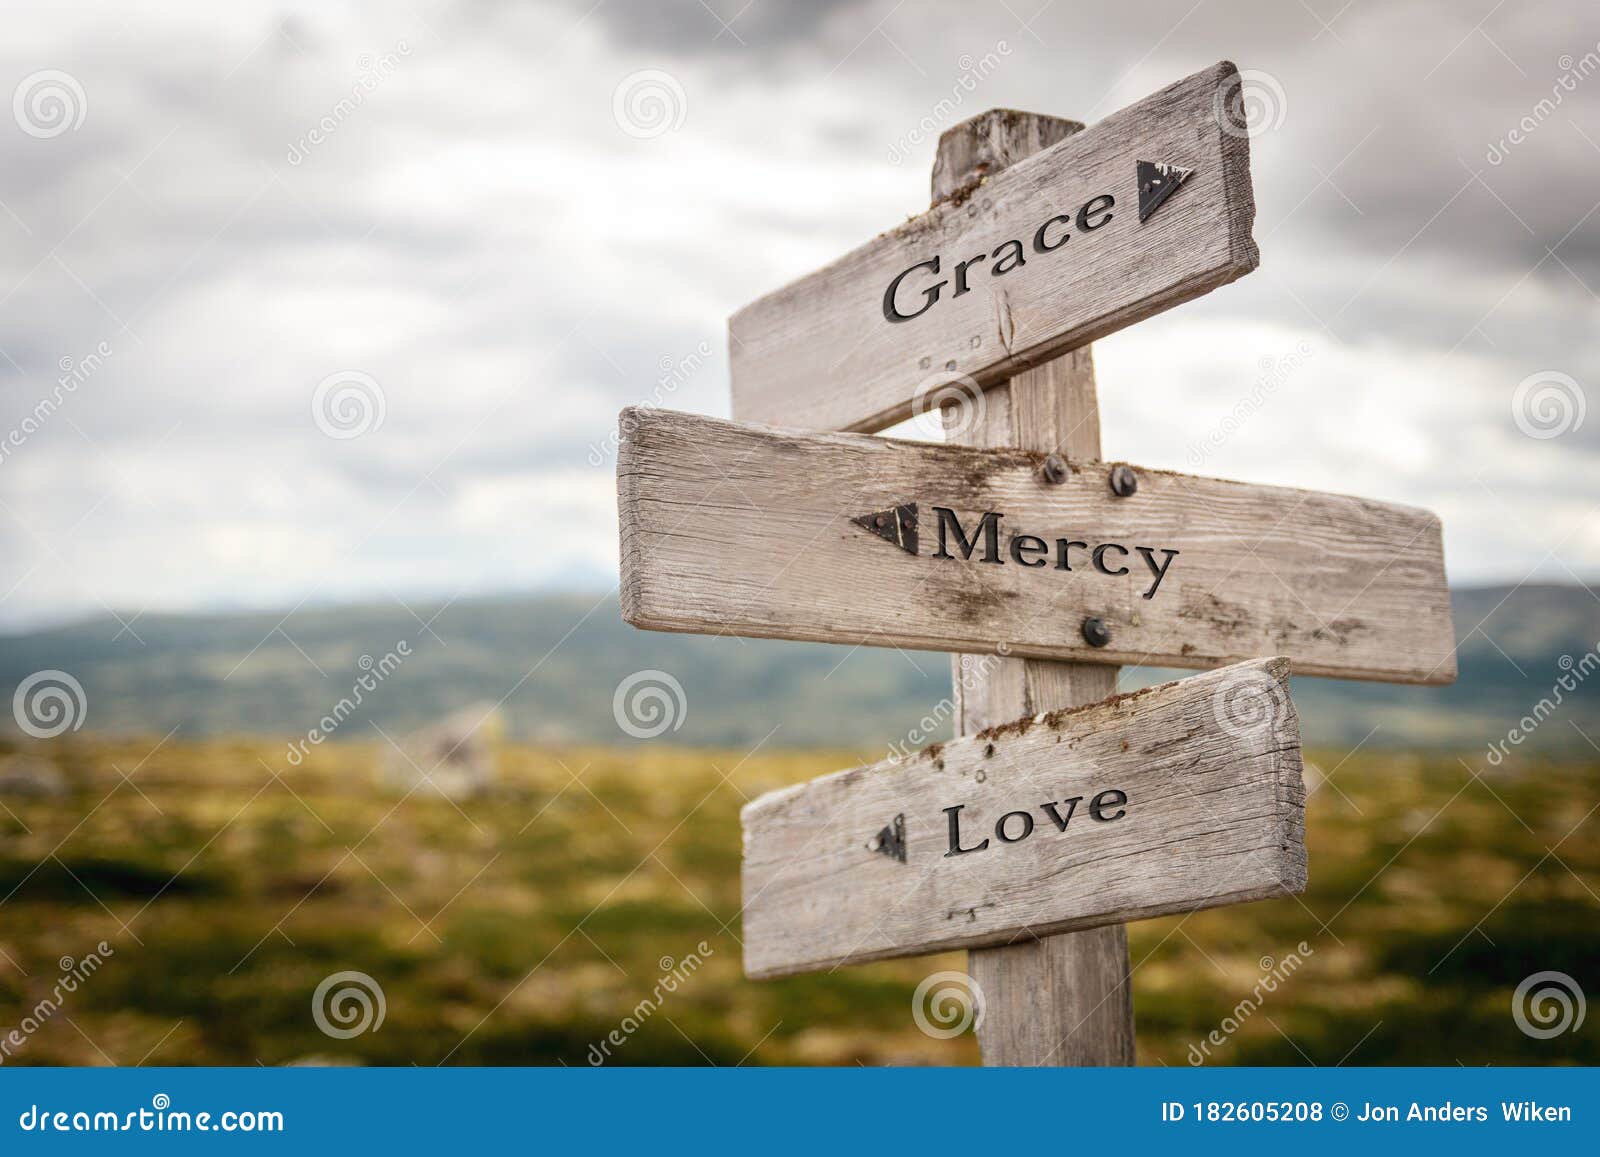 grace mercy love text engraved on old wooden signpost outdoors in nature